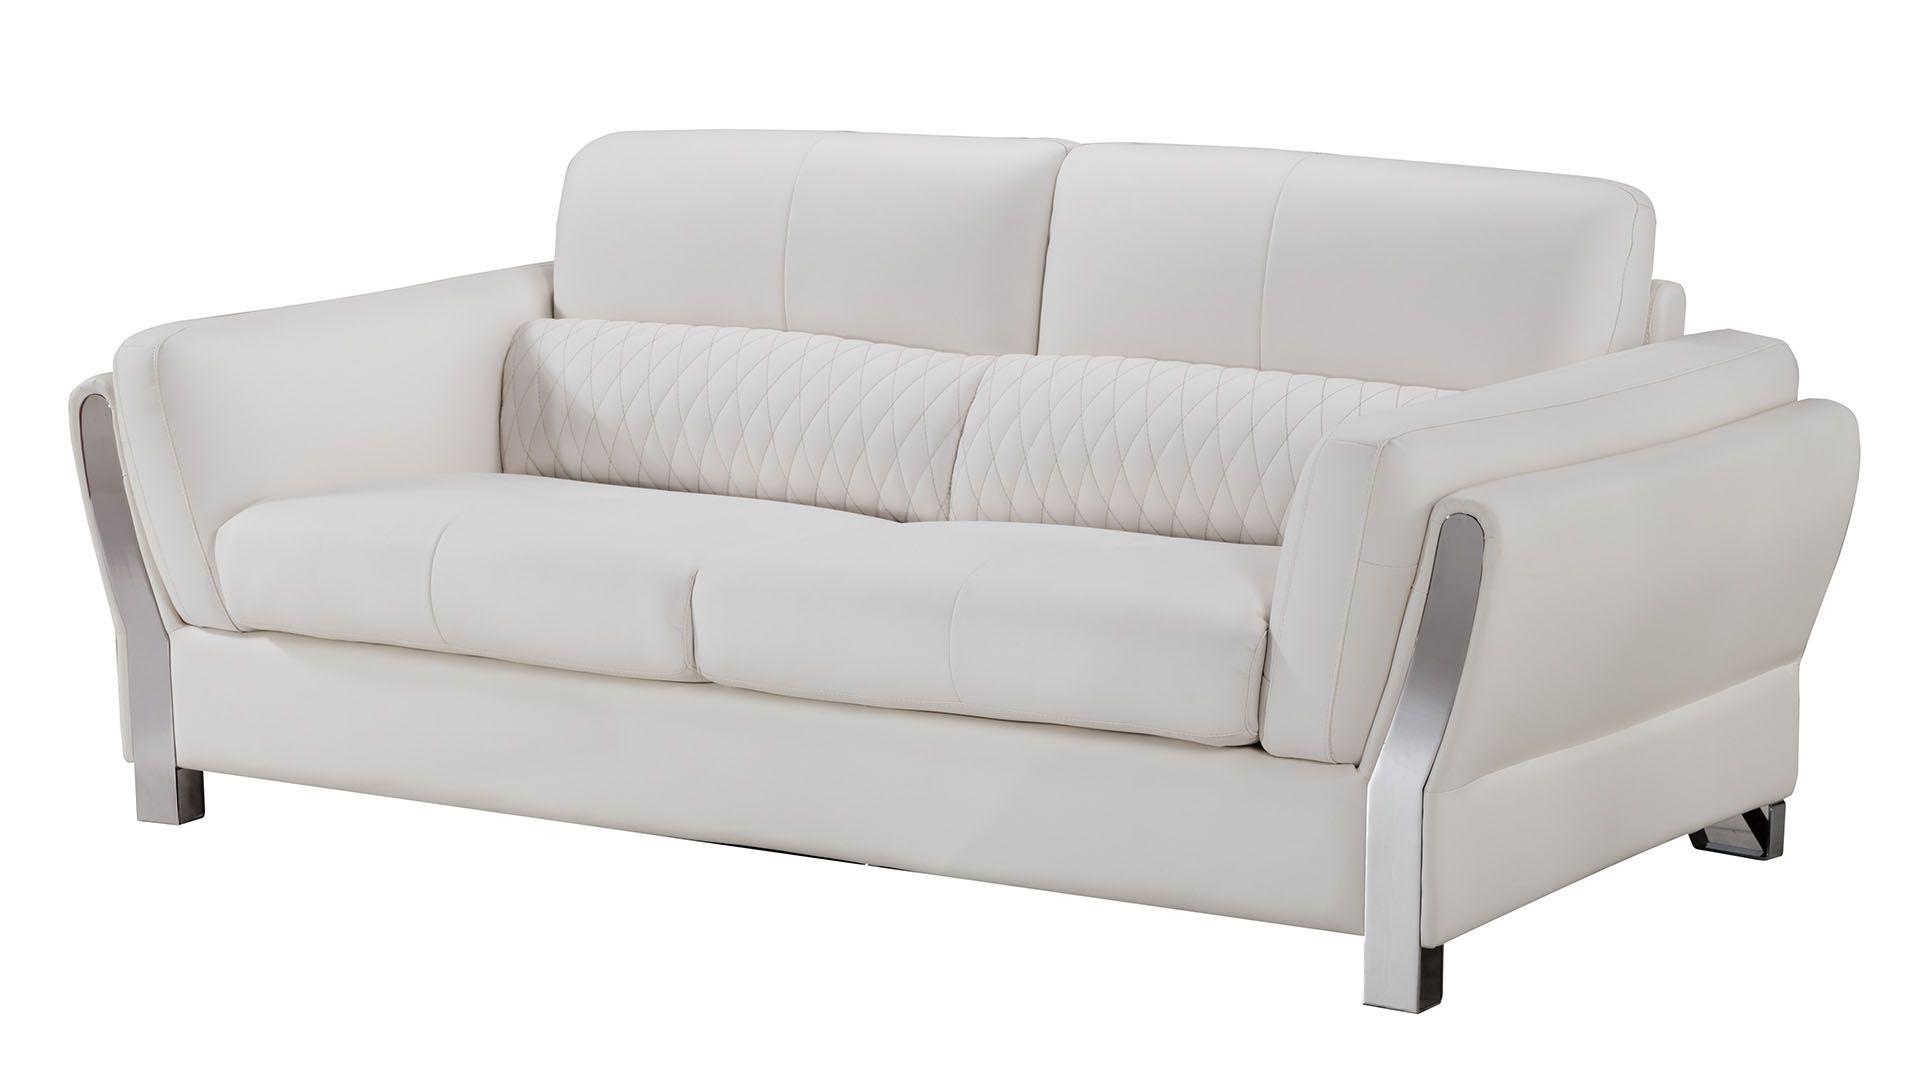 Contemporary, Modern Sofa AE690-W AE690-W-SF in Taupe Leather